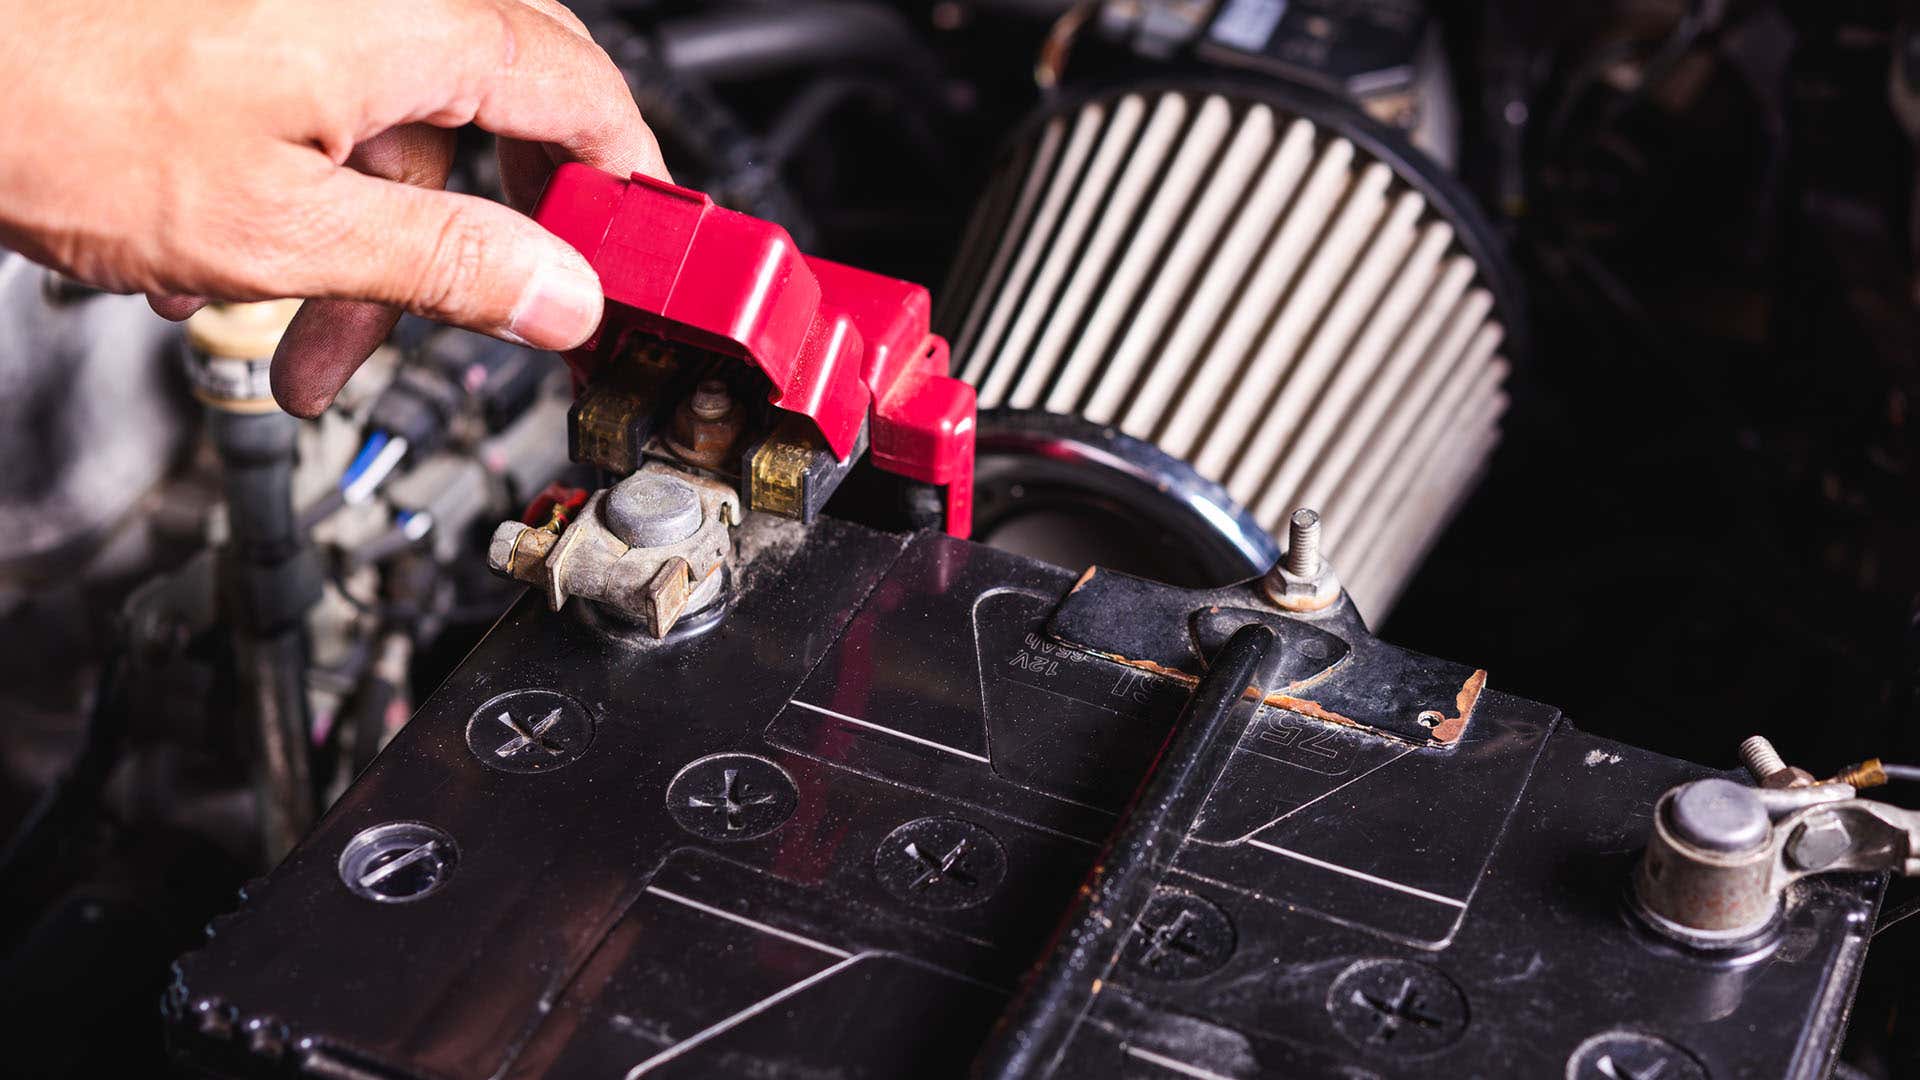 How Long Does A Car Battery Last? The Drive